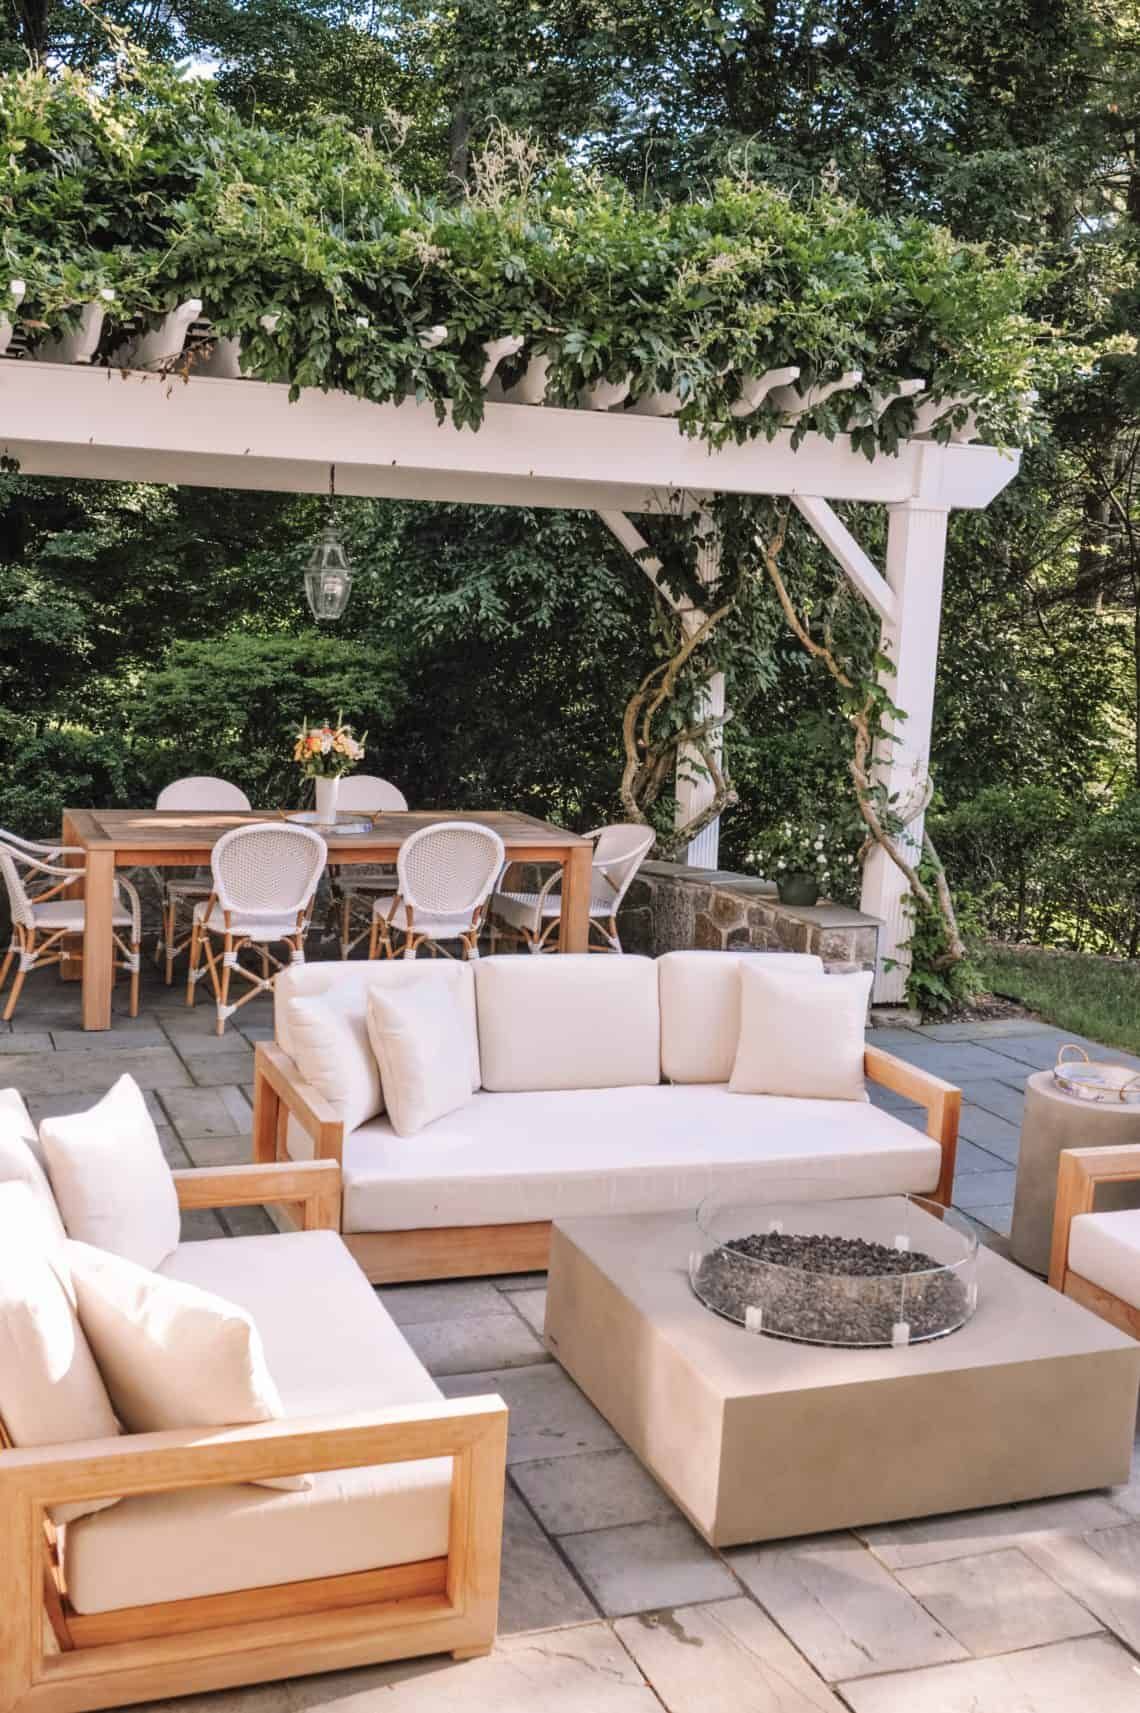 Creating a Relaxing Oasis: Tips for
Setting Up Your Patio Set